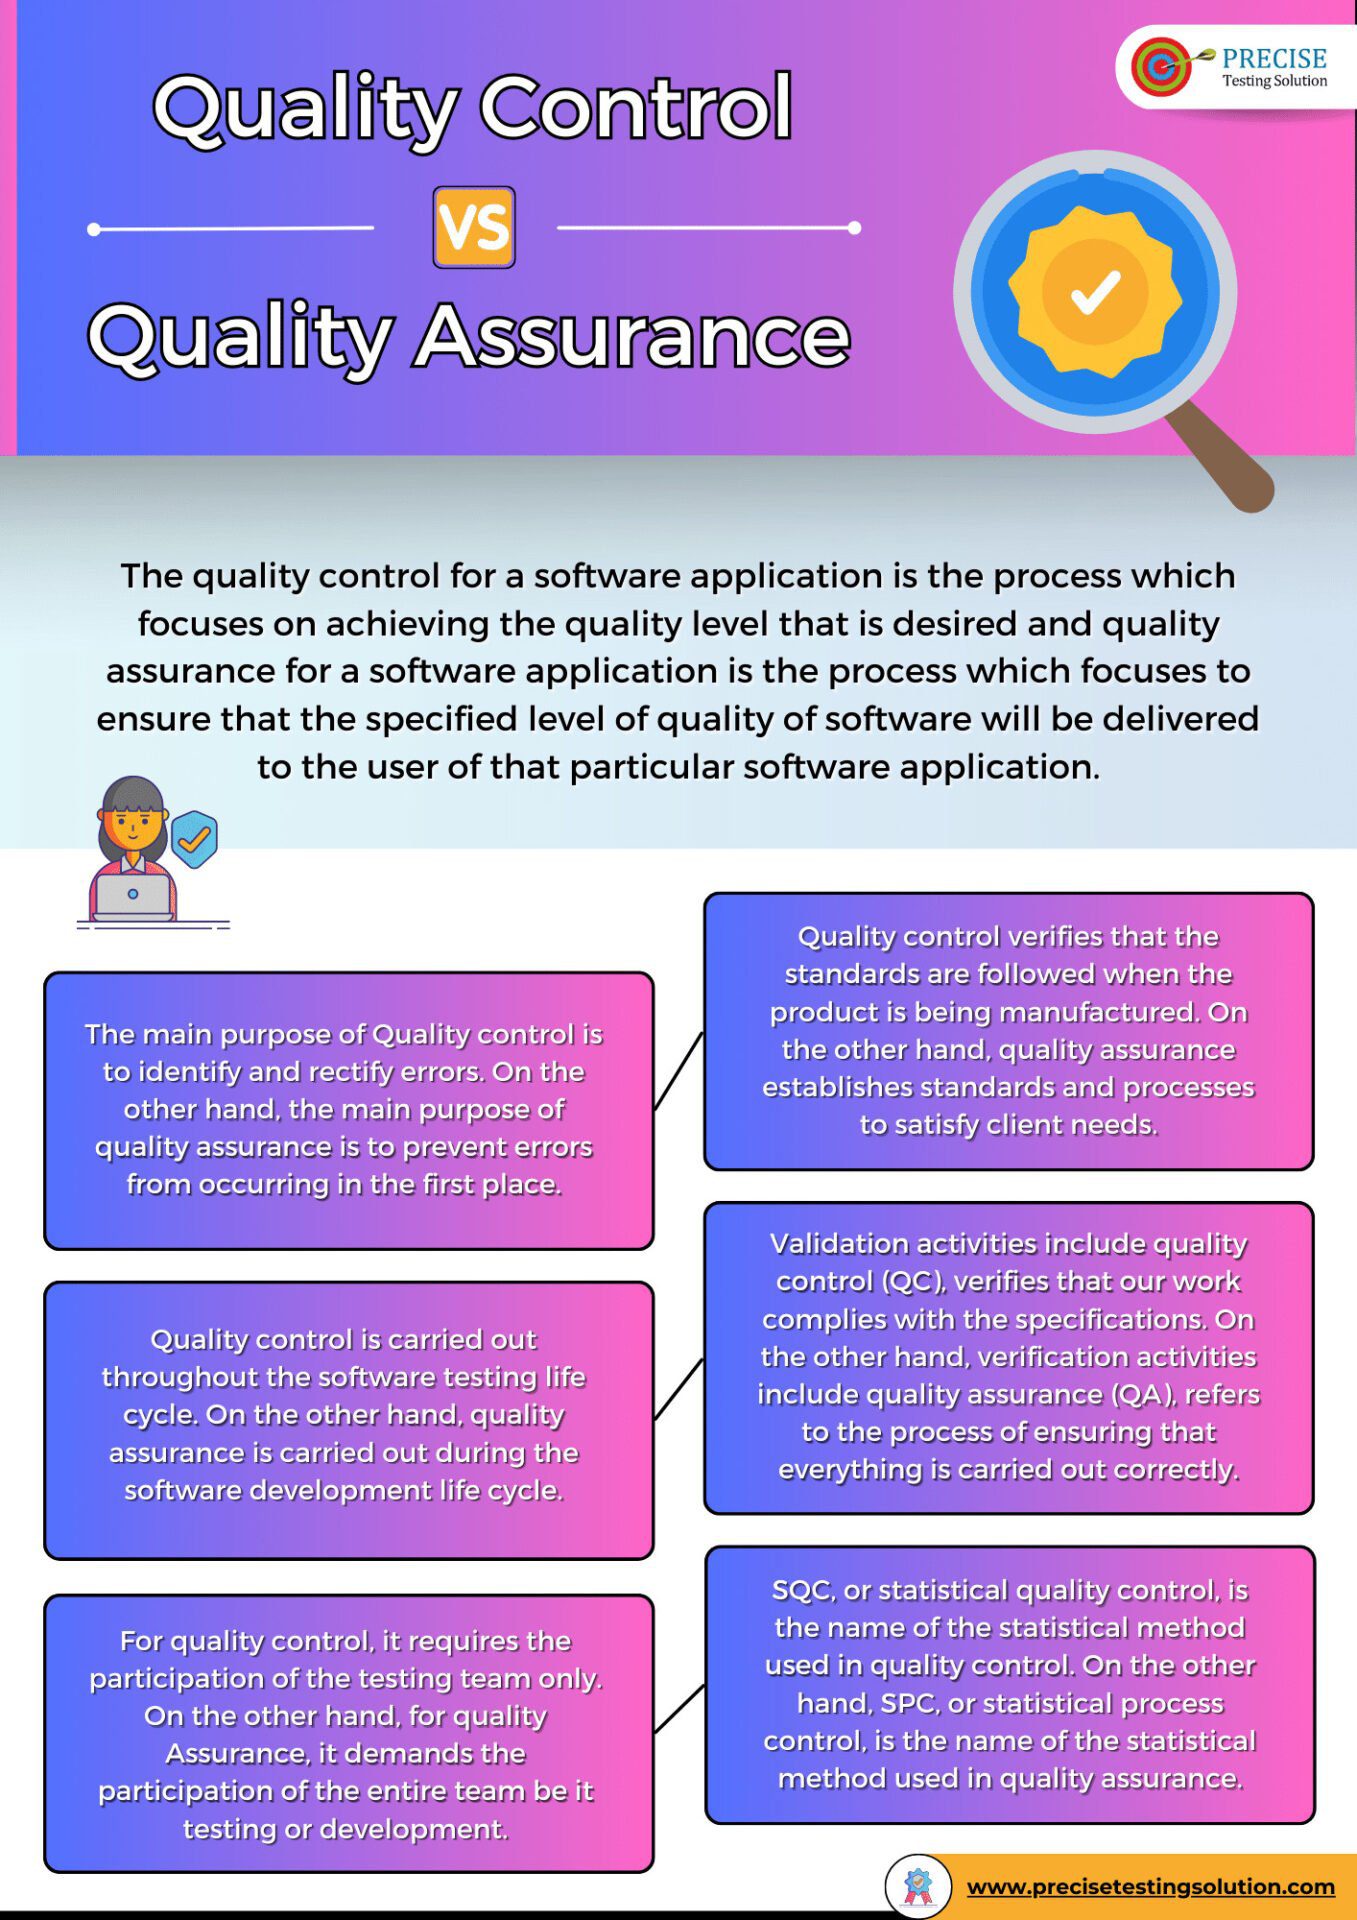 Differences Between Quality Control And Quality Assurance